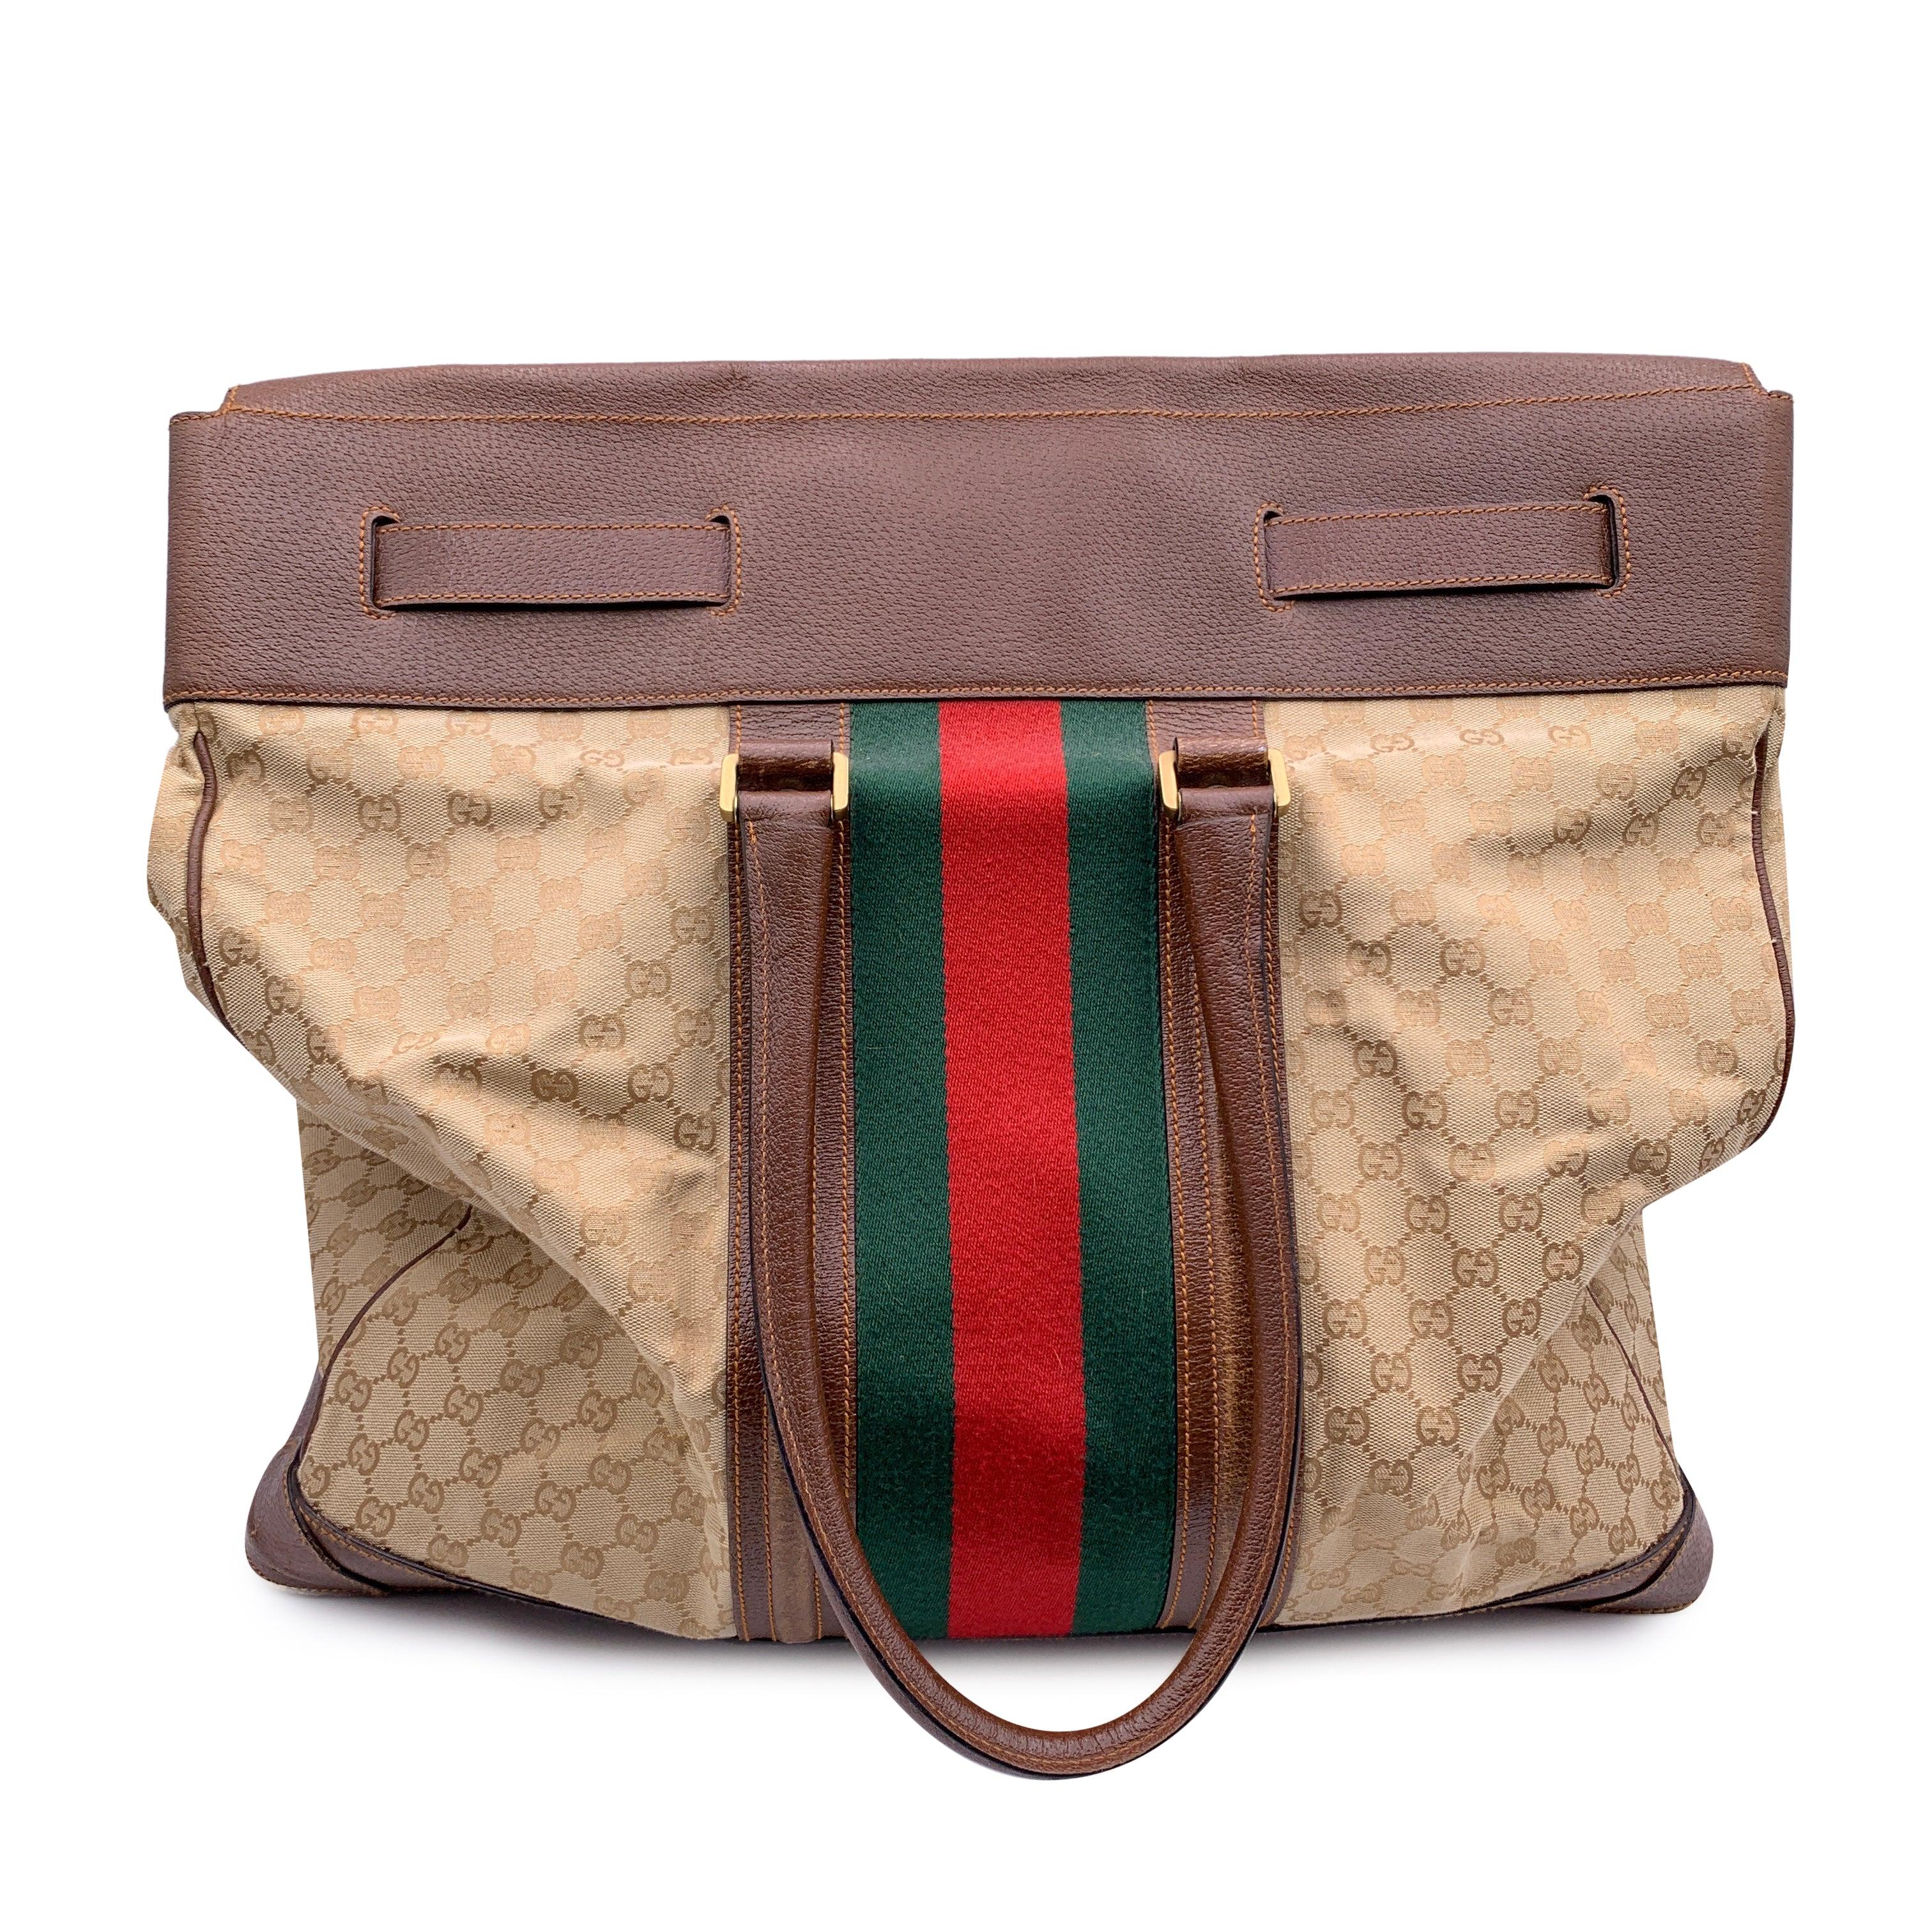 Gucci Beige Monogram Canvas Weekender Travel Bag with Stripes In Excellent Condition For Sale In Rome, Rome